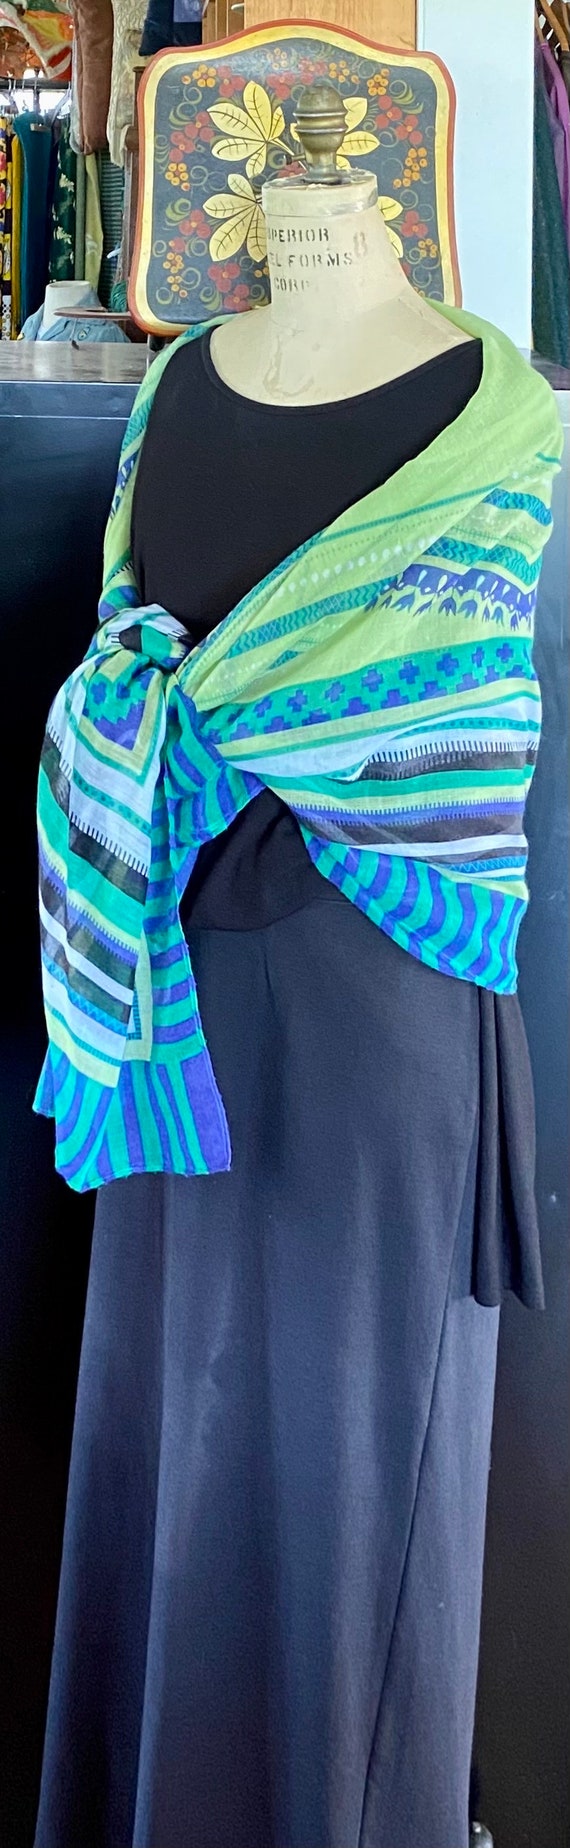 Green and Blue Woven Cotton Gauze Shawl - image 10